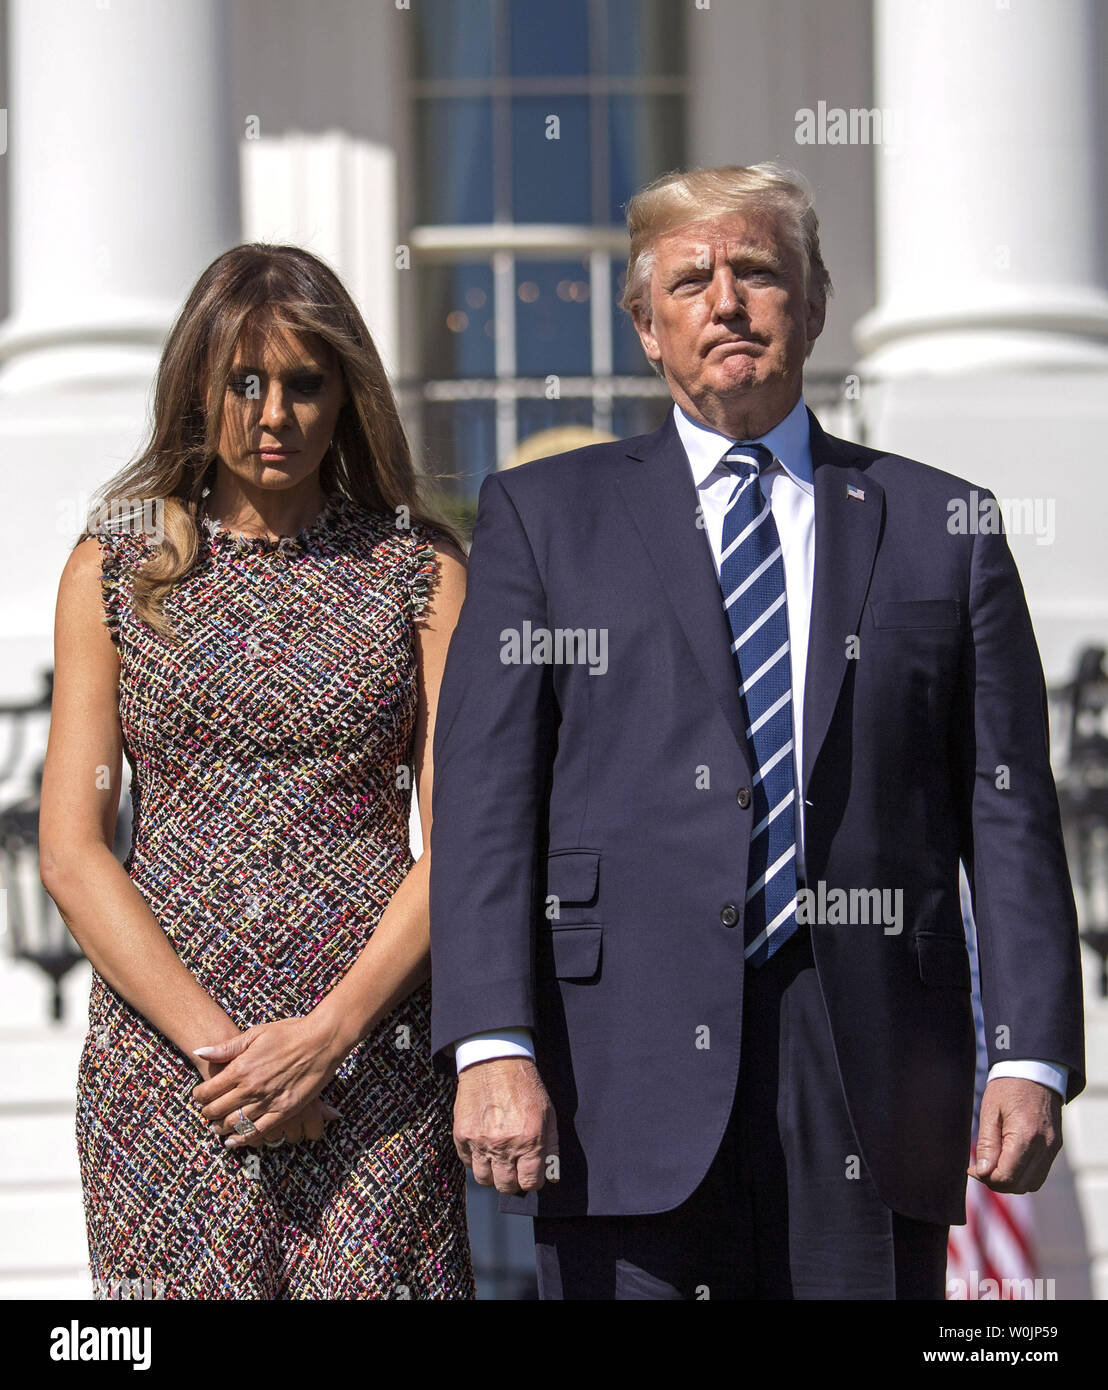 President Donald Trump and First Lady Melania Trump participate in a moment  of silence for the victims of Sunday's mass shootings in Las Vegas, at the  White House in Washington, D.C. on